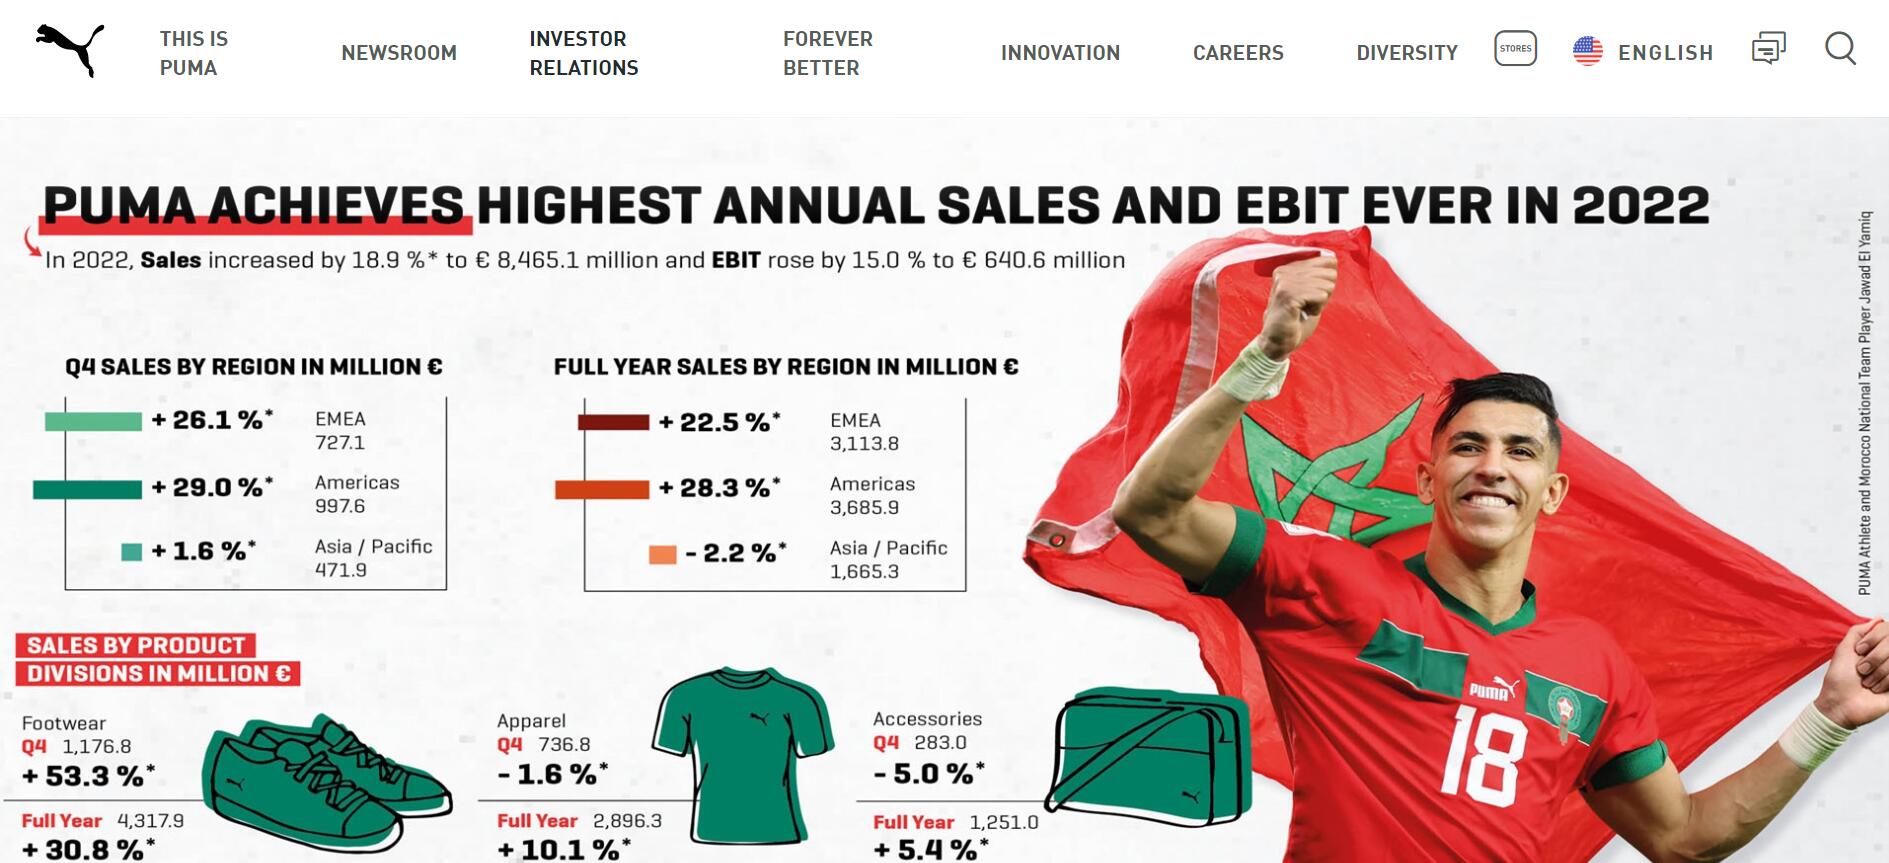 PUMA FY2022 Sales Rise 24.4% to a New Record €8.465 Billion: Confident for the Mid and Long-term Success and Continued Growth